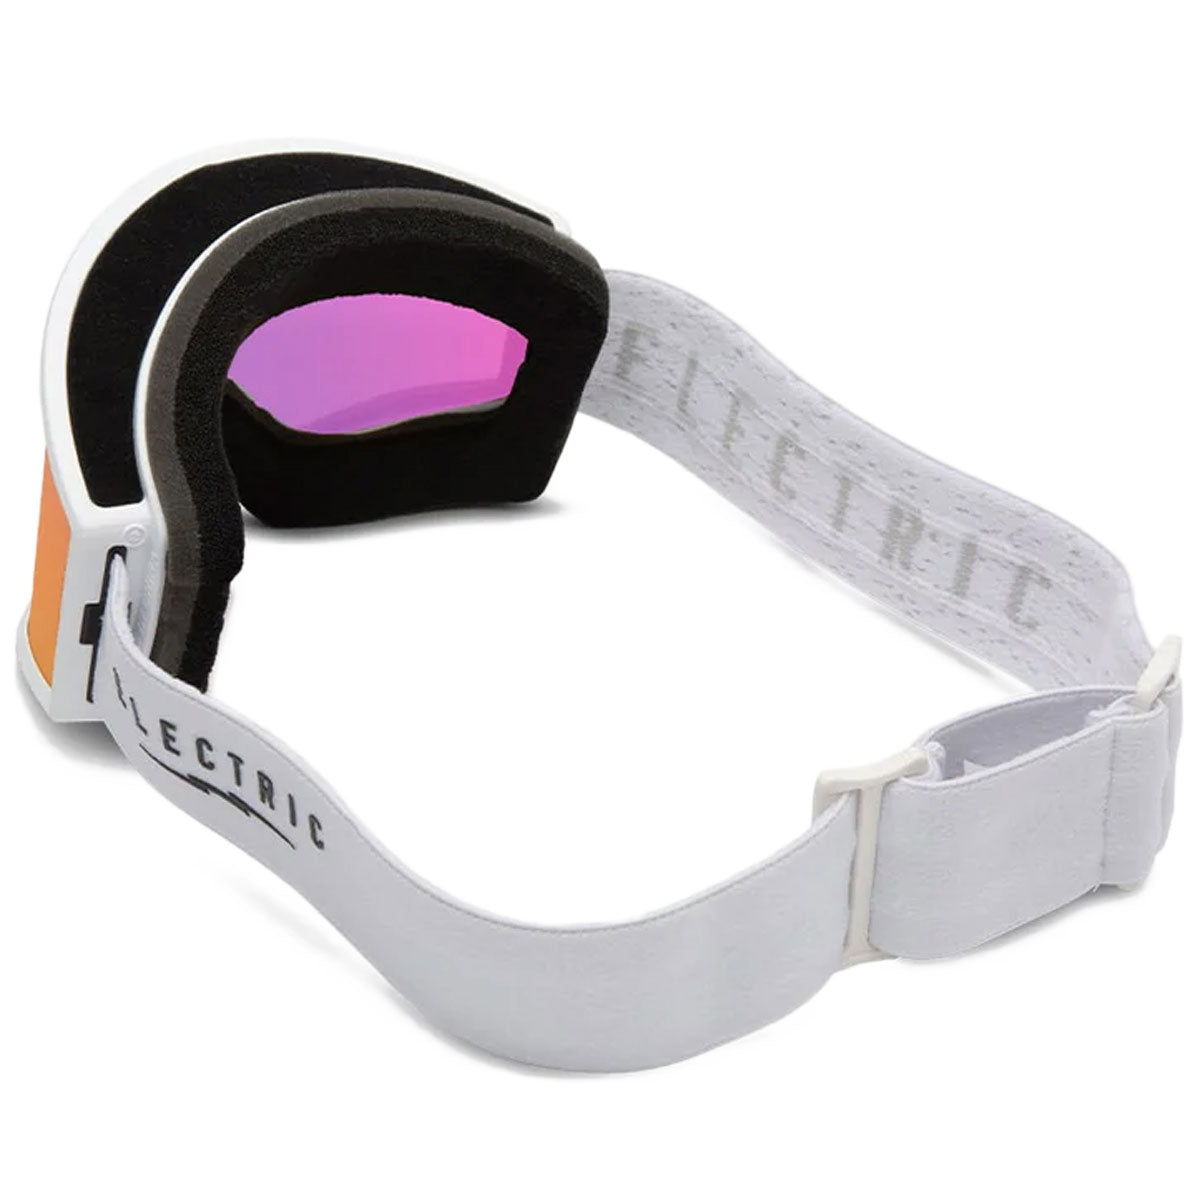 Electric Kleveland.S Snowboard Goggles - Matte White/Pink Chrome image 2